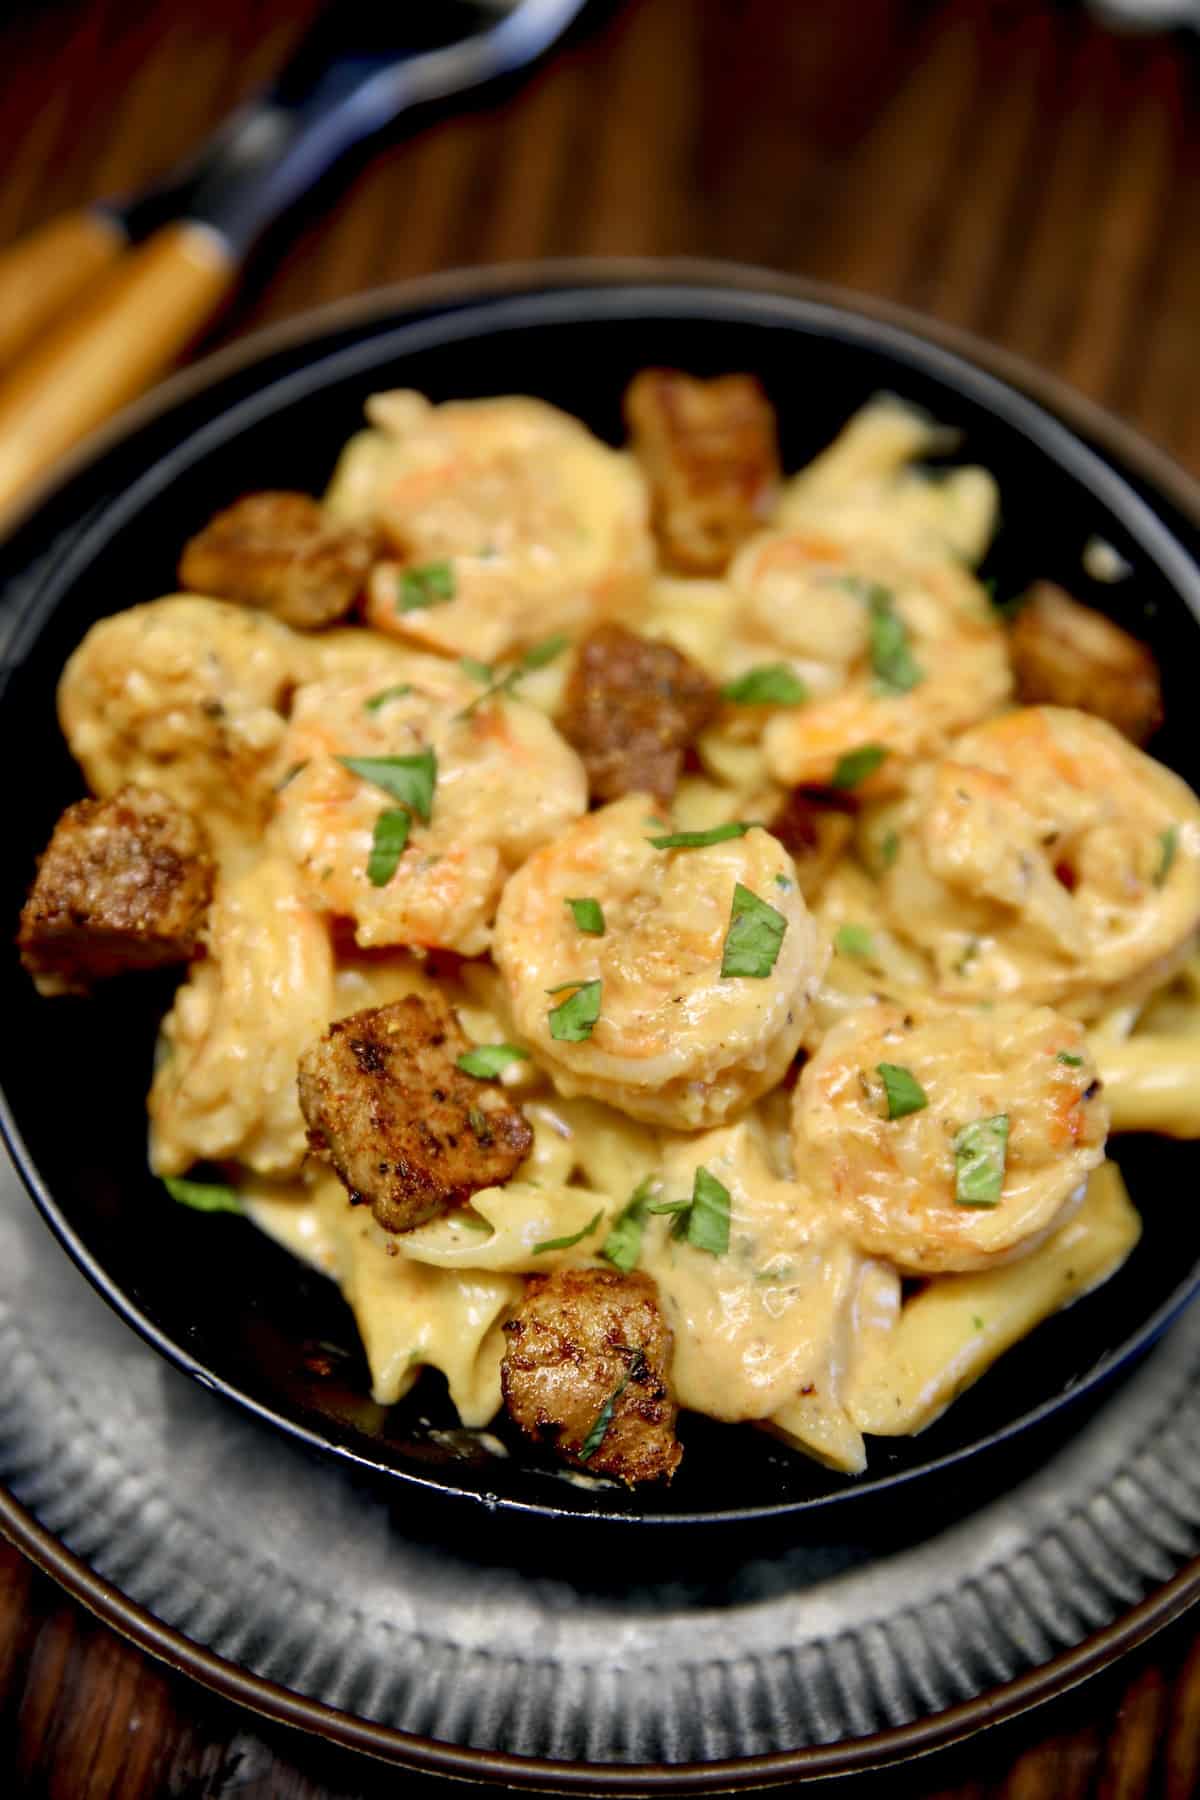 Bowl of pasta with steak and shrimp in a creamy Cajun sauce.